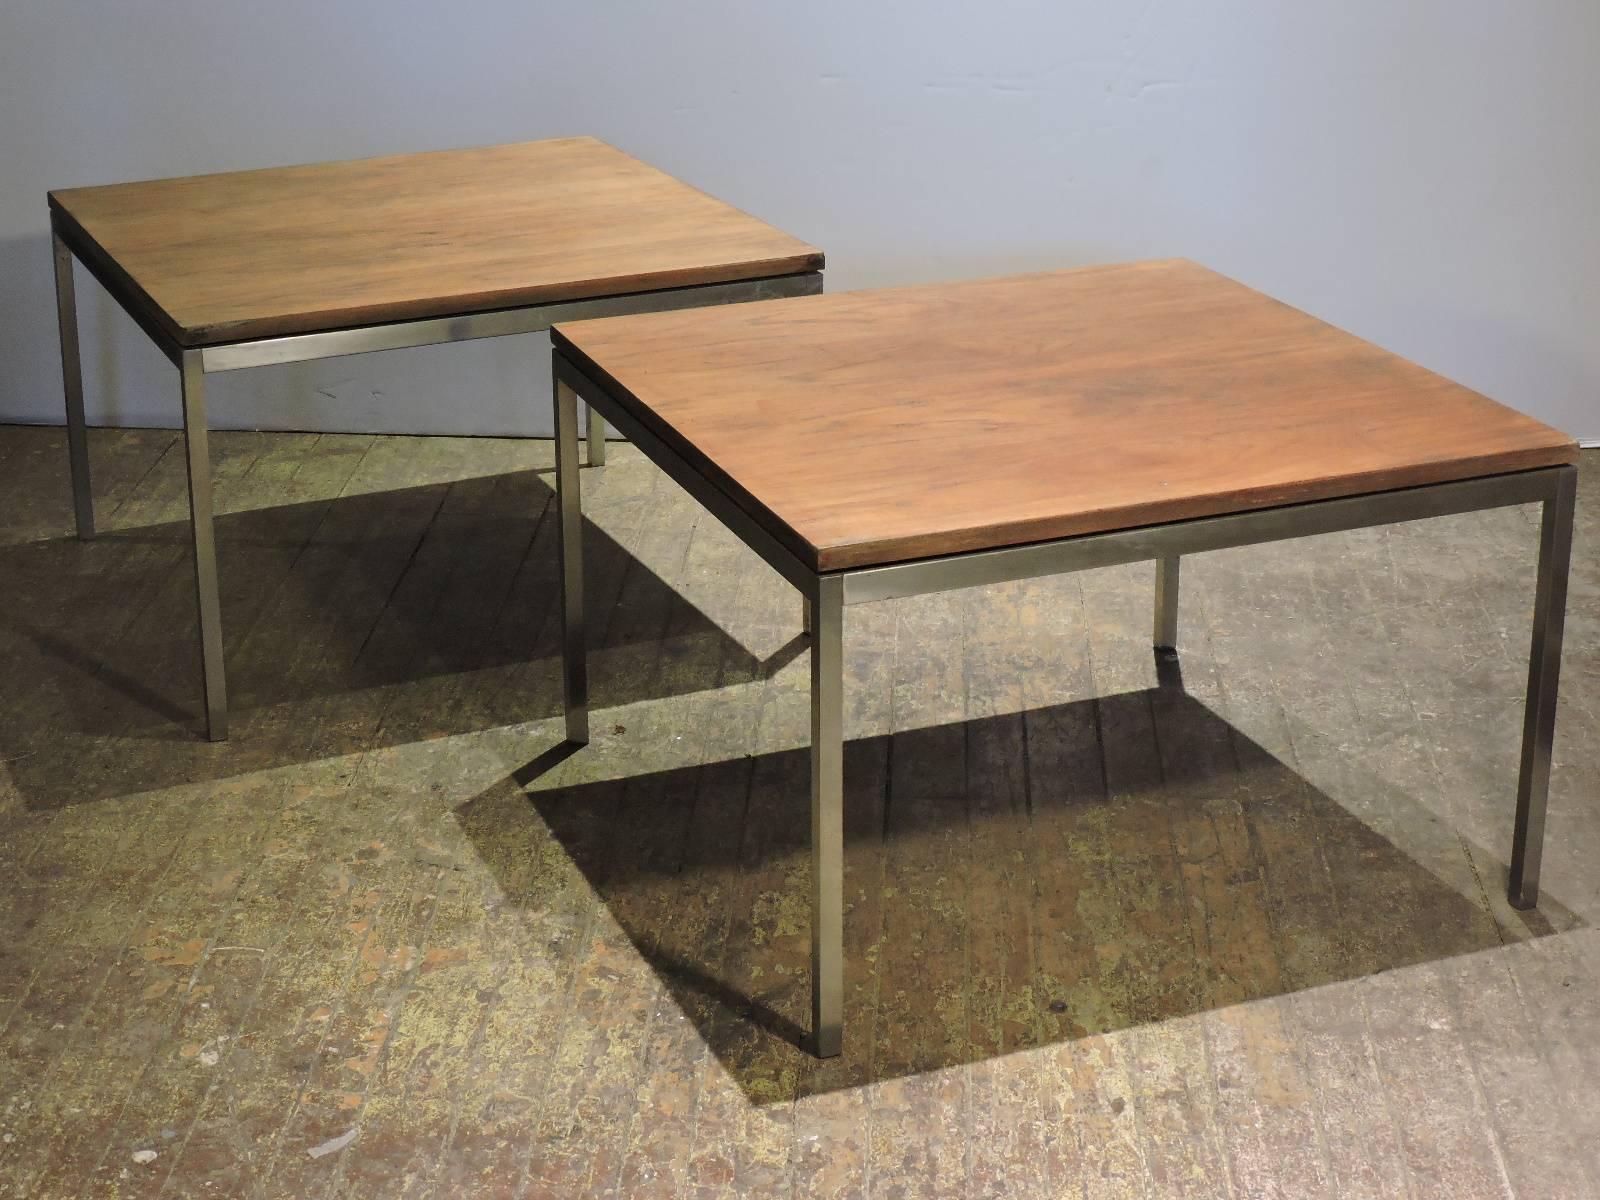 A pair of all original early production Florence Knoll minimalist designed solid steel tables with floating walnut tops. Both tables with Knoll Associates, Park Avenue NYC labels on underside of tops - circa 1950's.
Please look at all the pictures.